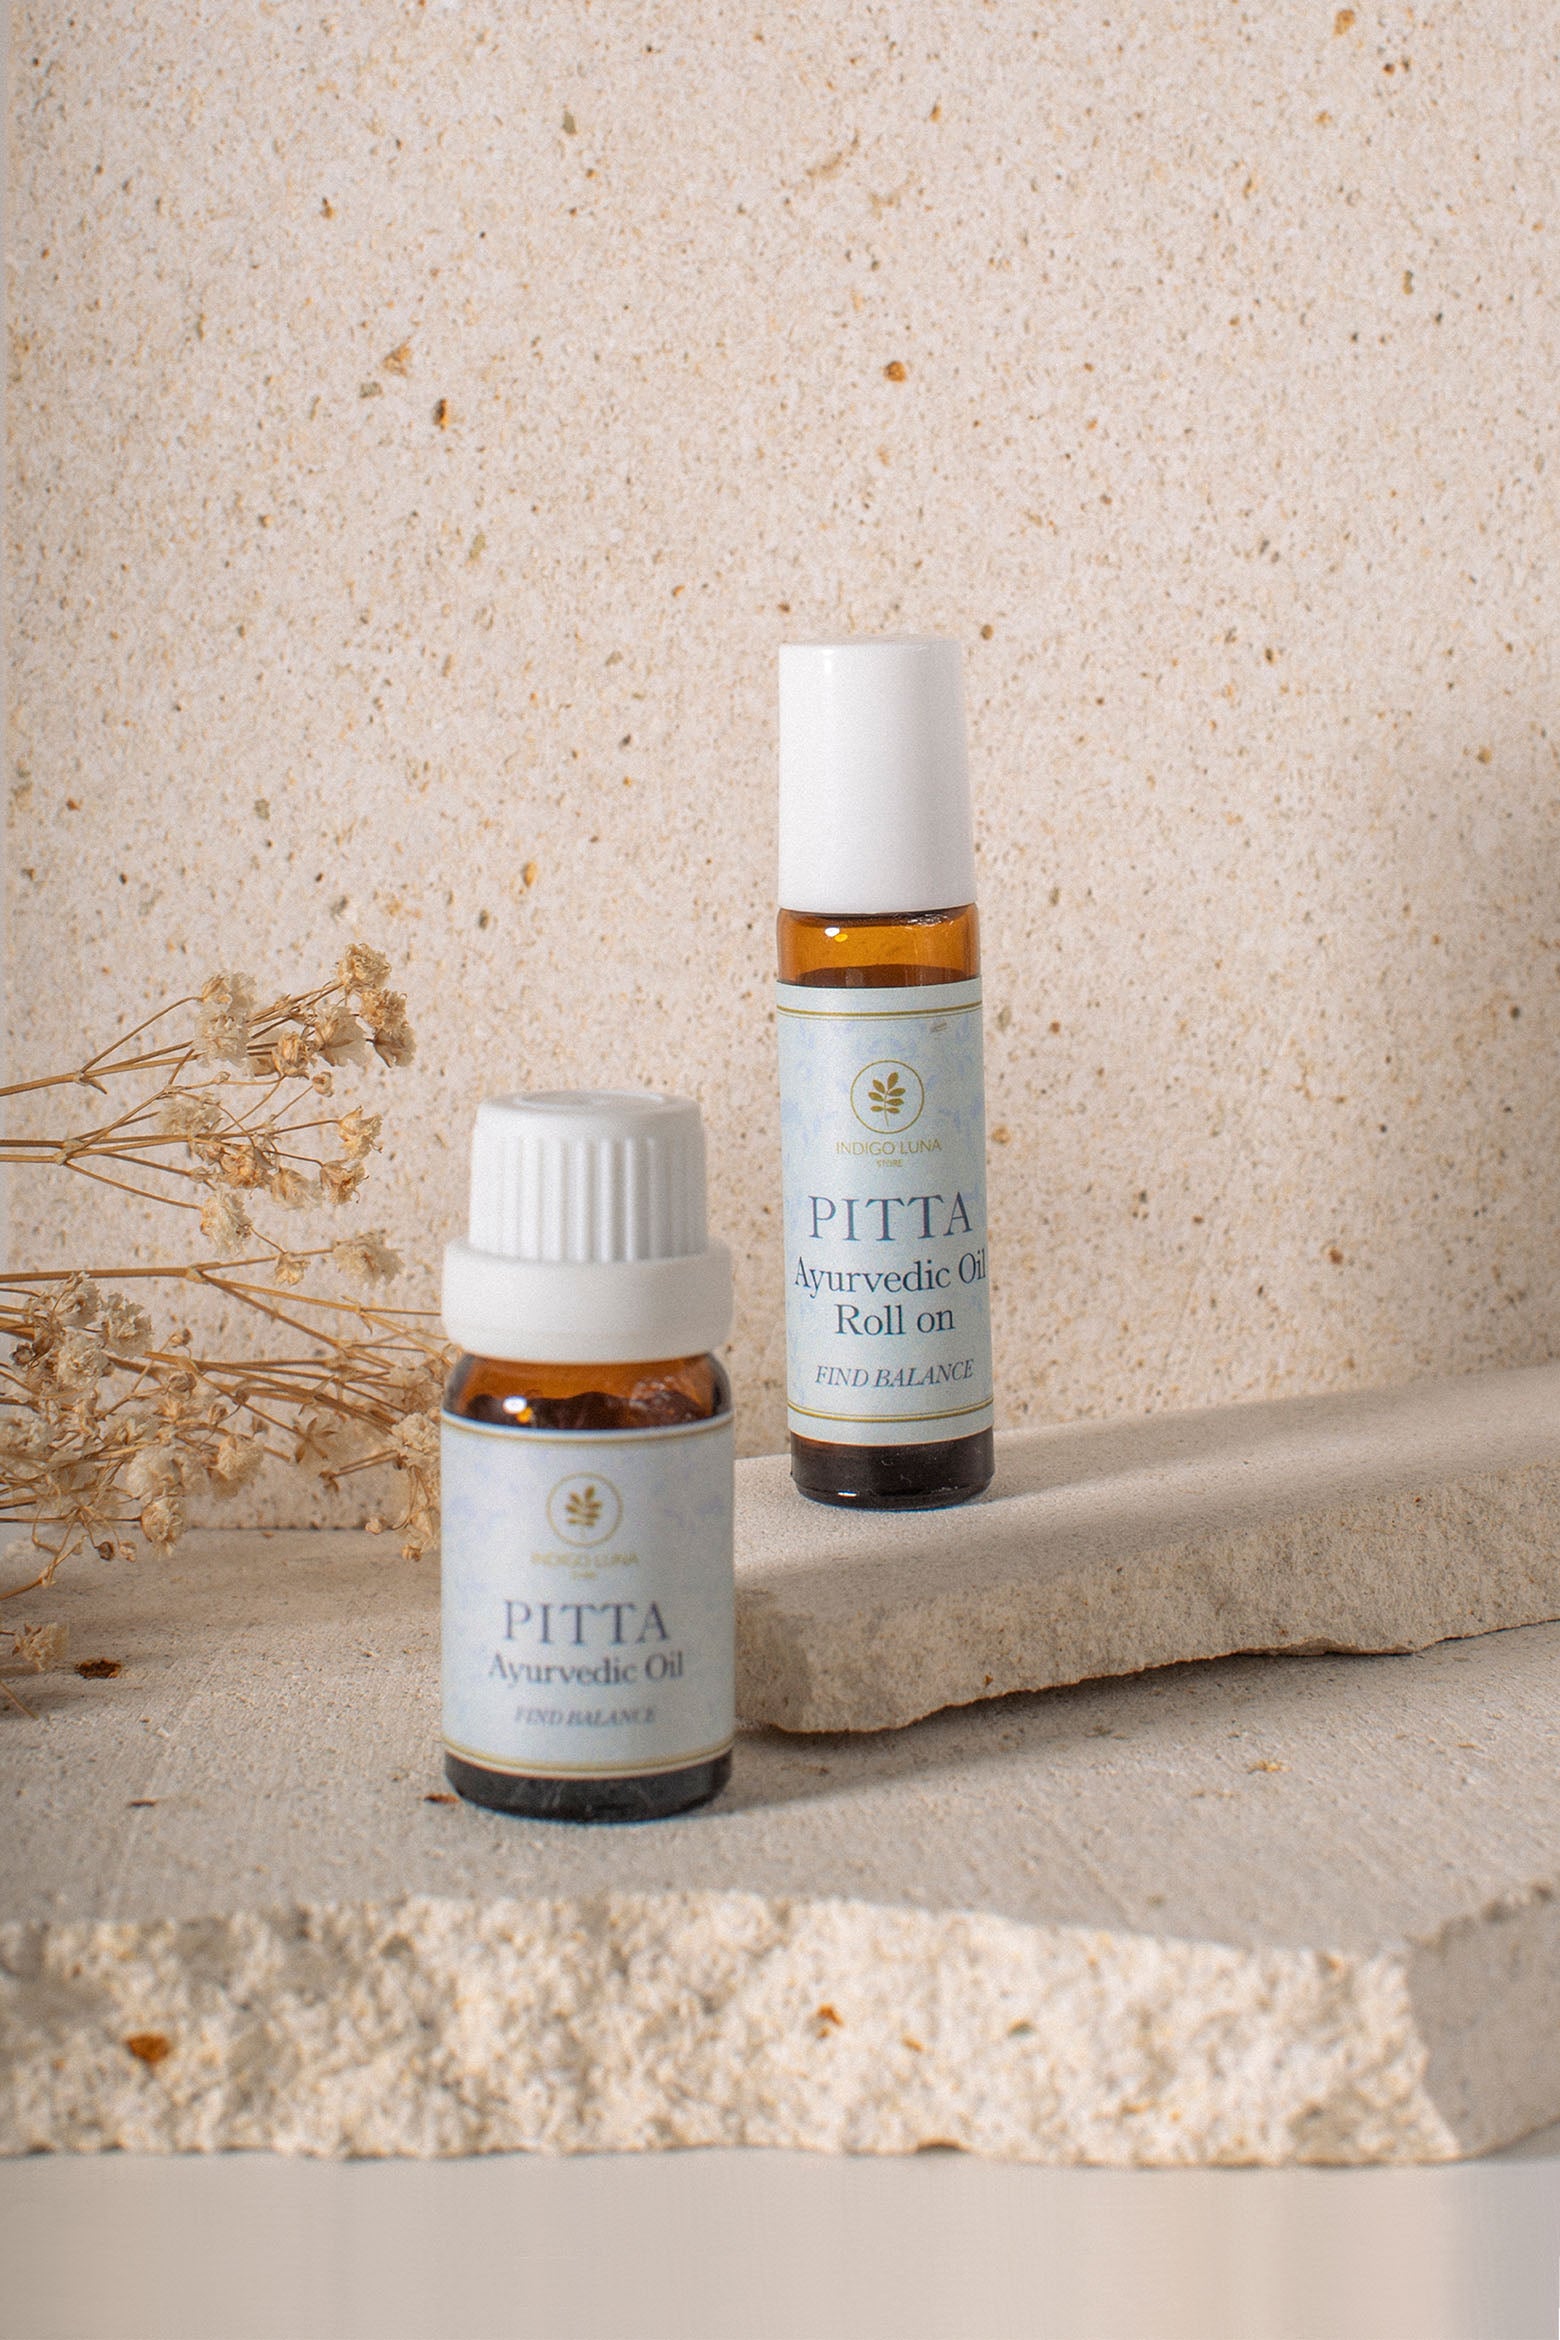 Ayurvedic essential oil for Pitta Dosha in a dropper bottle and in Roll on